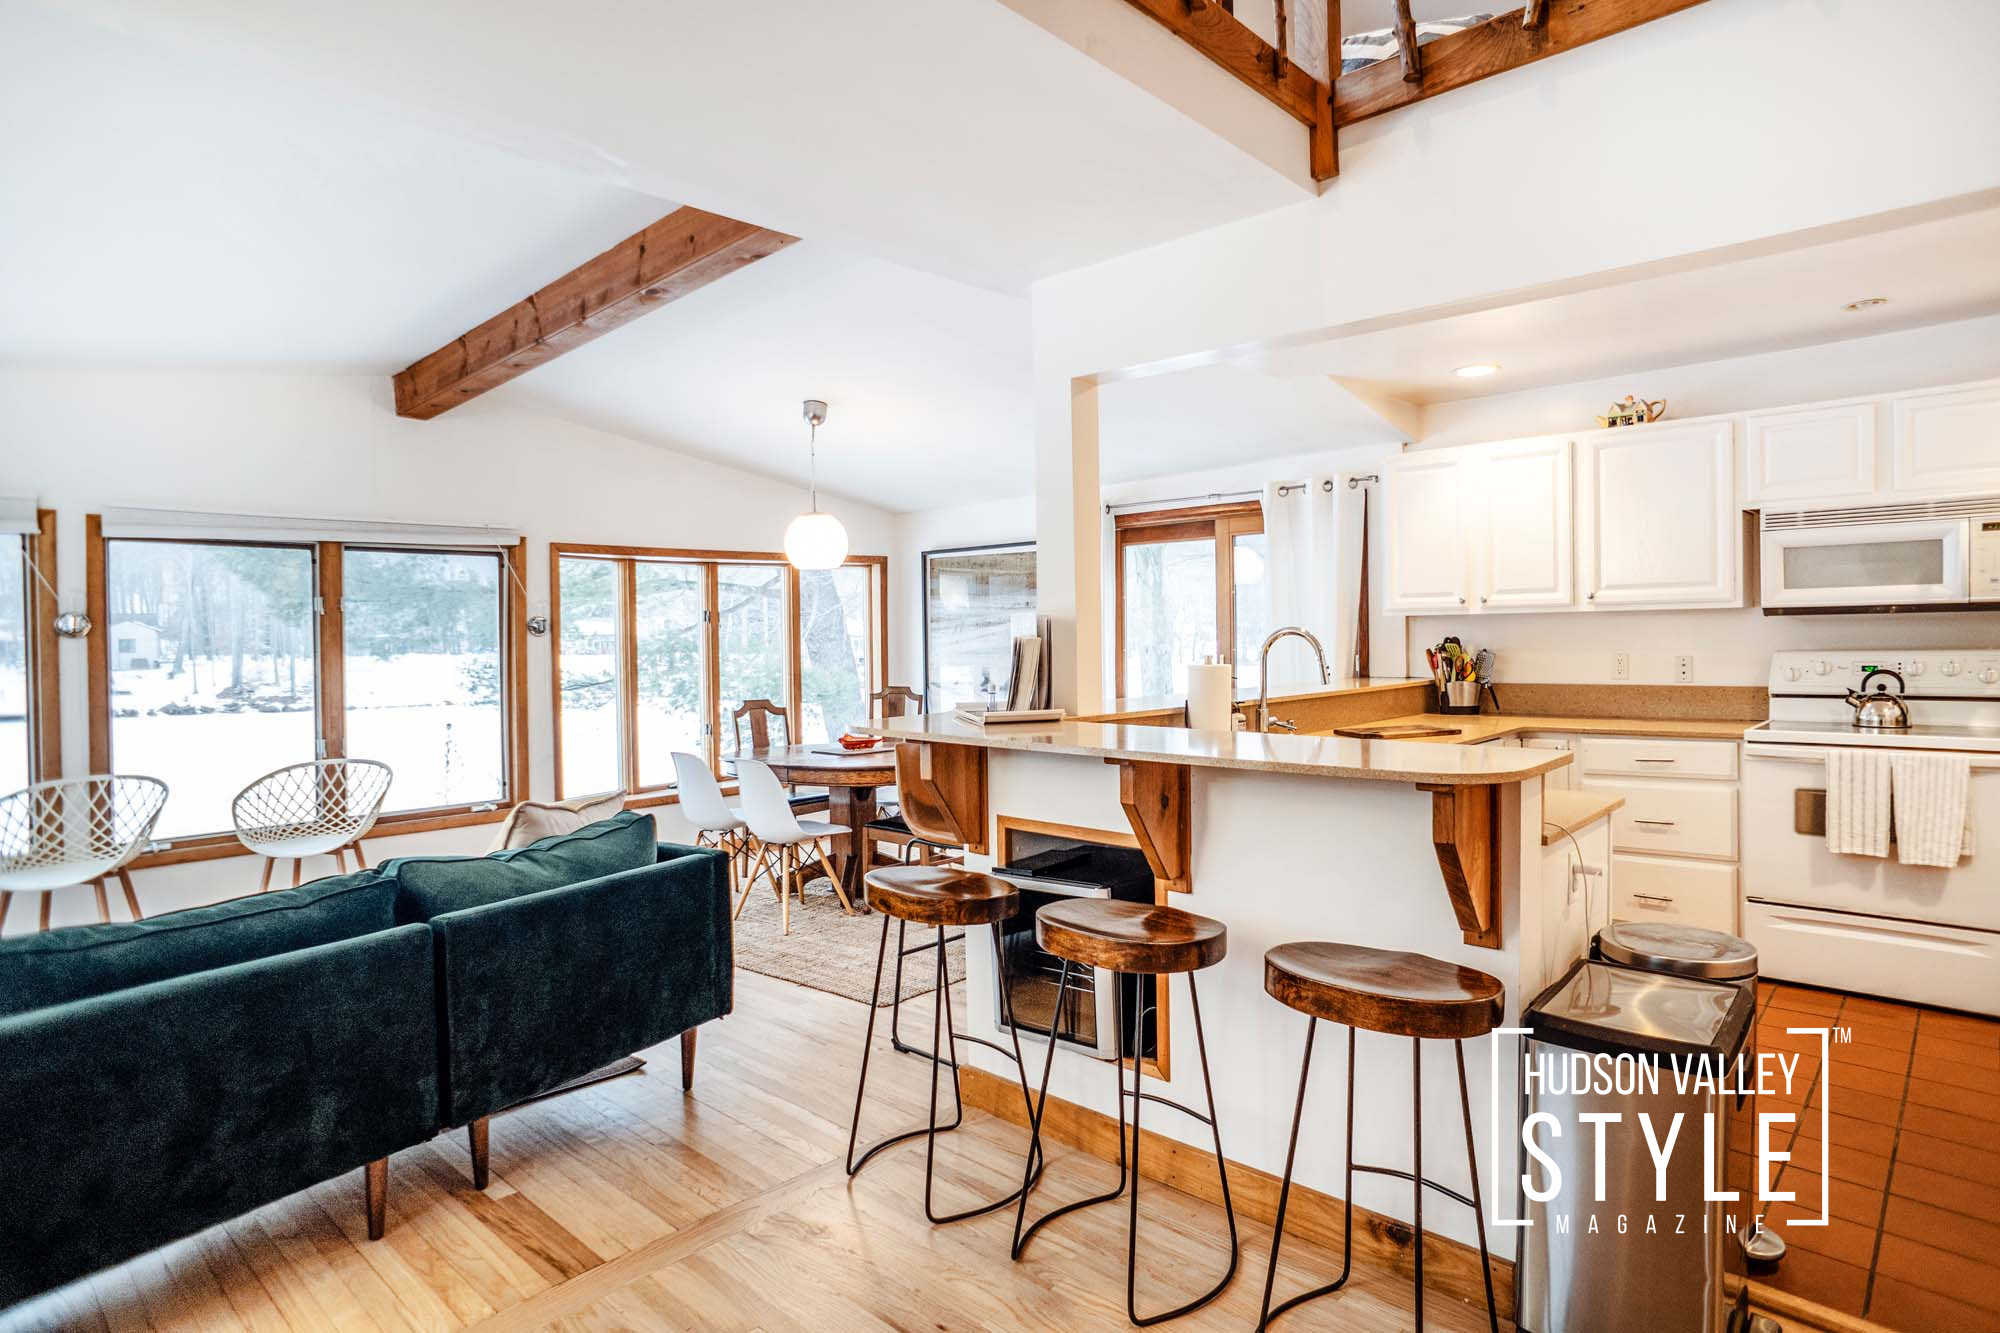 Spend a Weekend away from the City in the Beautiful Pinebush Lake House Spend a Weekend away from the City in the Beautiful Pinebush Lake House – Airbnb / VRBO Photography by Alluvion Real Estate – Photographer Maxwell Alexander – Duncan Avenue Studios